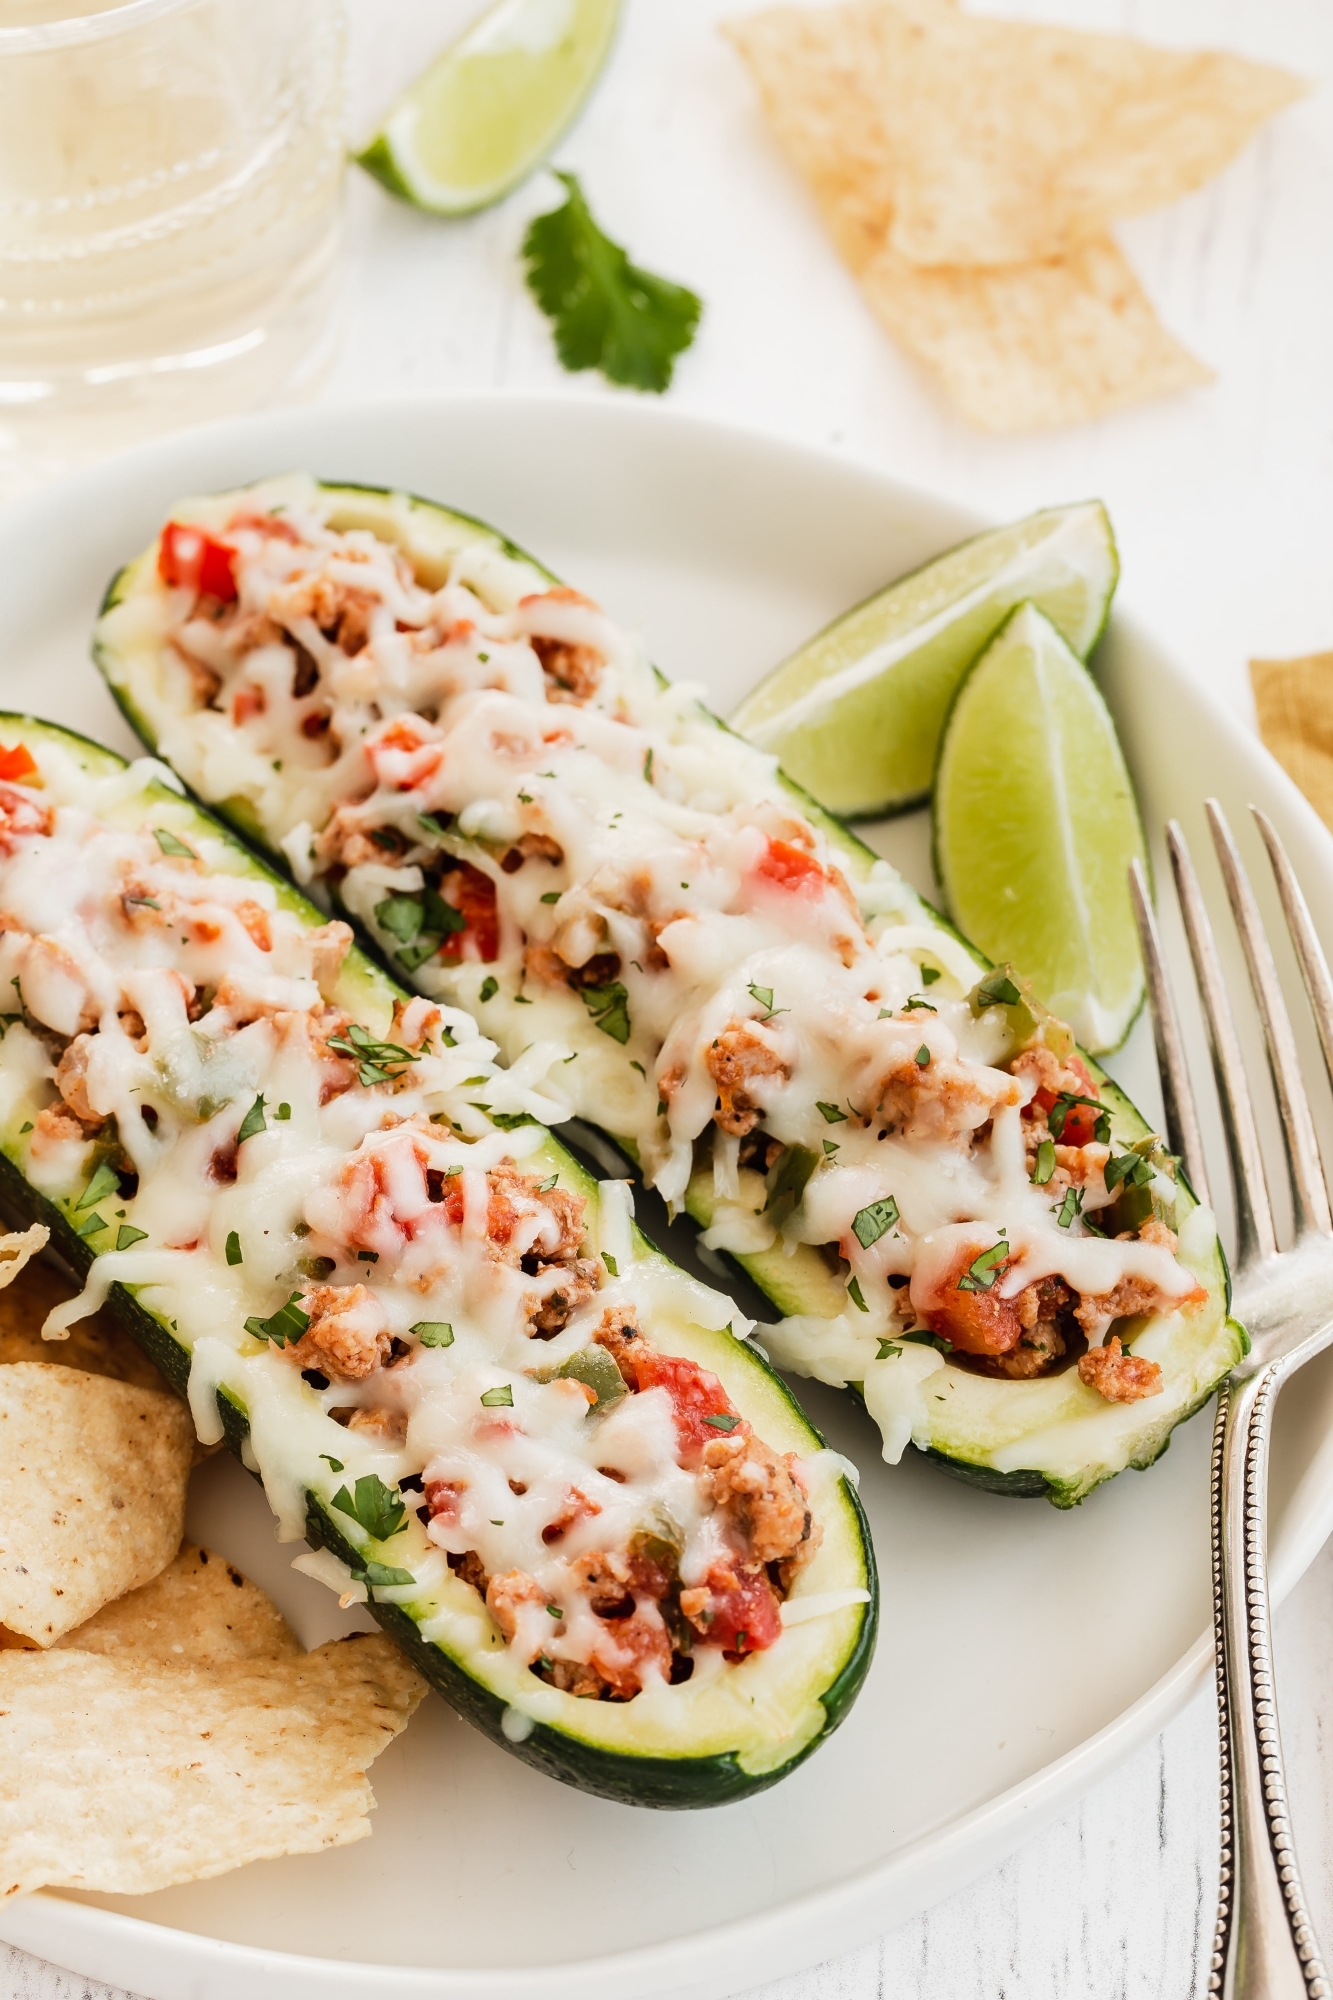 Zucchini stuffed taco boats with ground turkey, salsa, taco seasoning, and melted cheese.